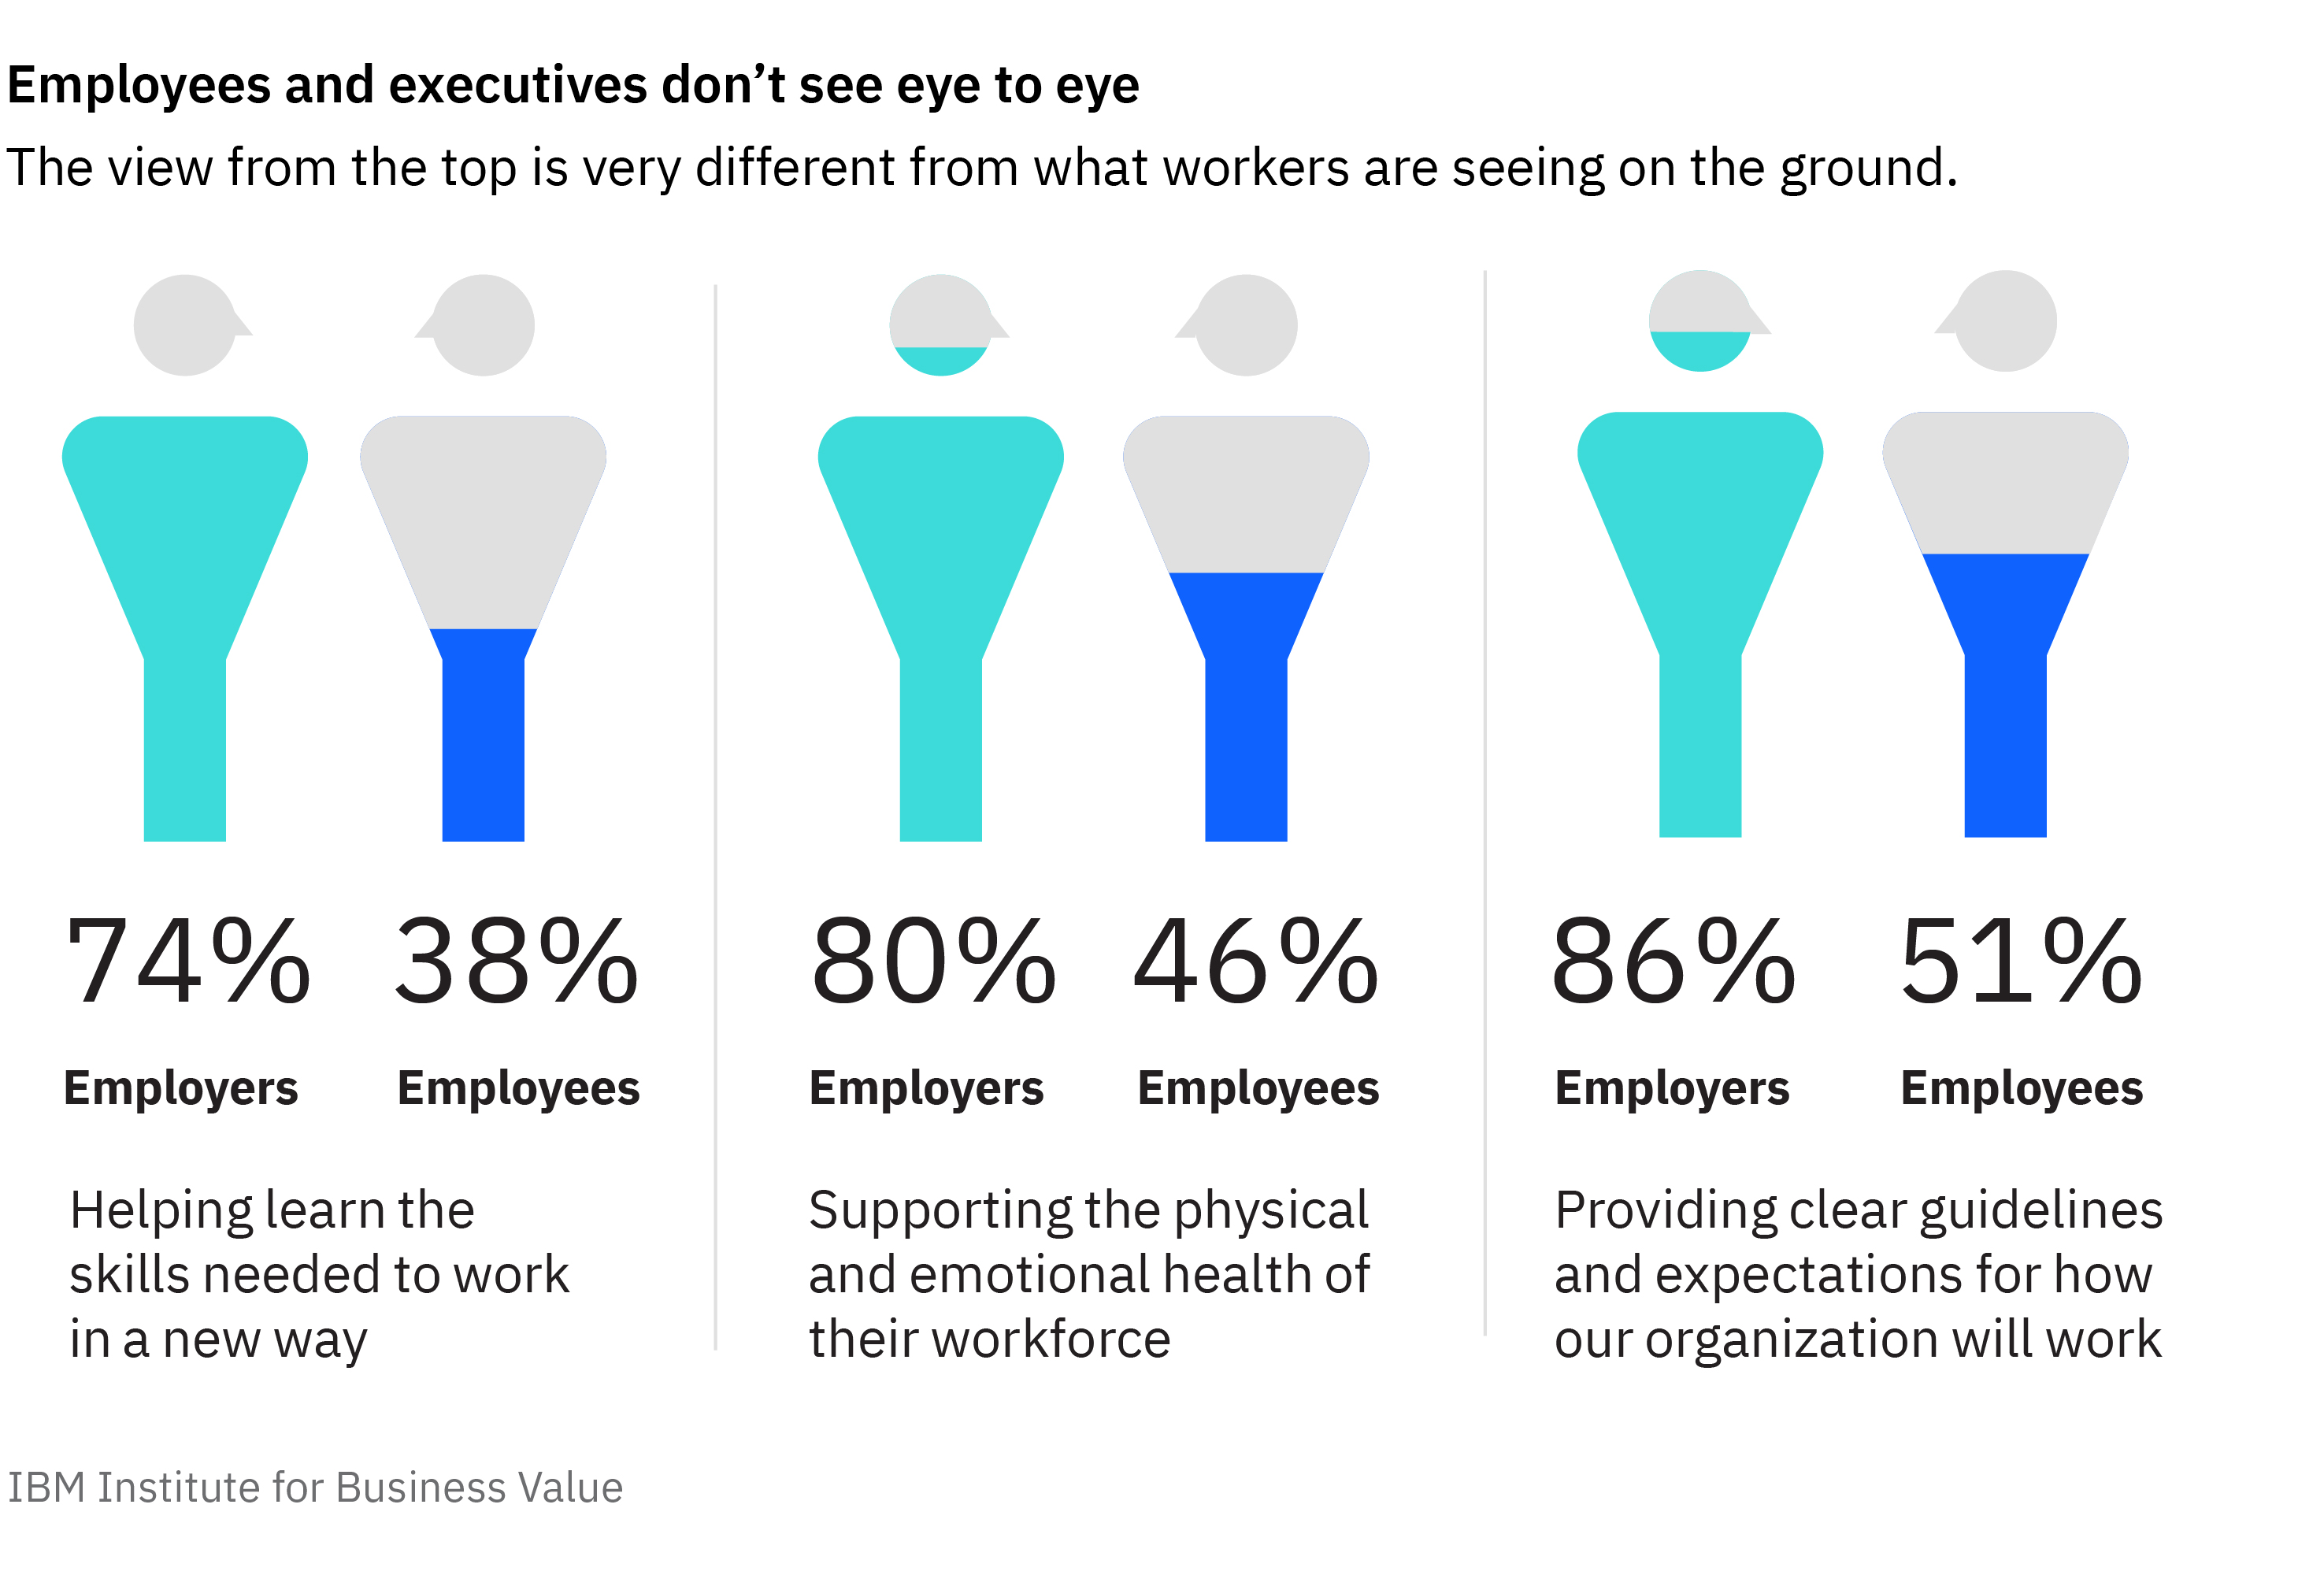 Employees and executives don’t see eye to eye